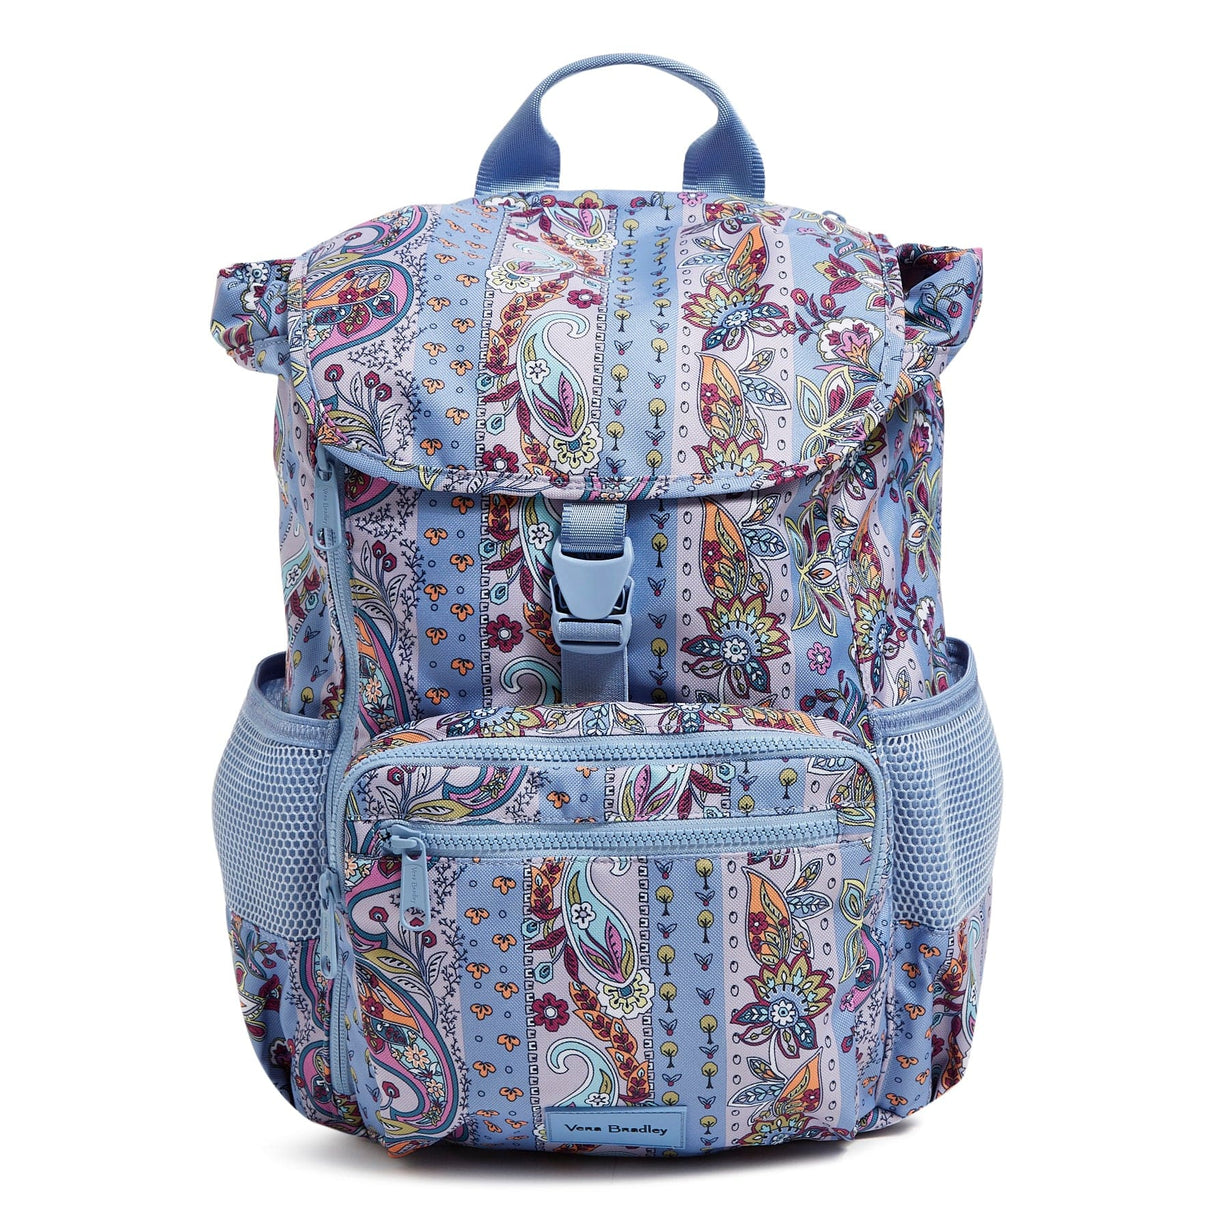 lightweight backpack for day trips in paisley pattern